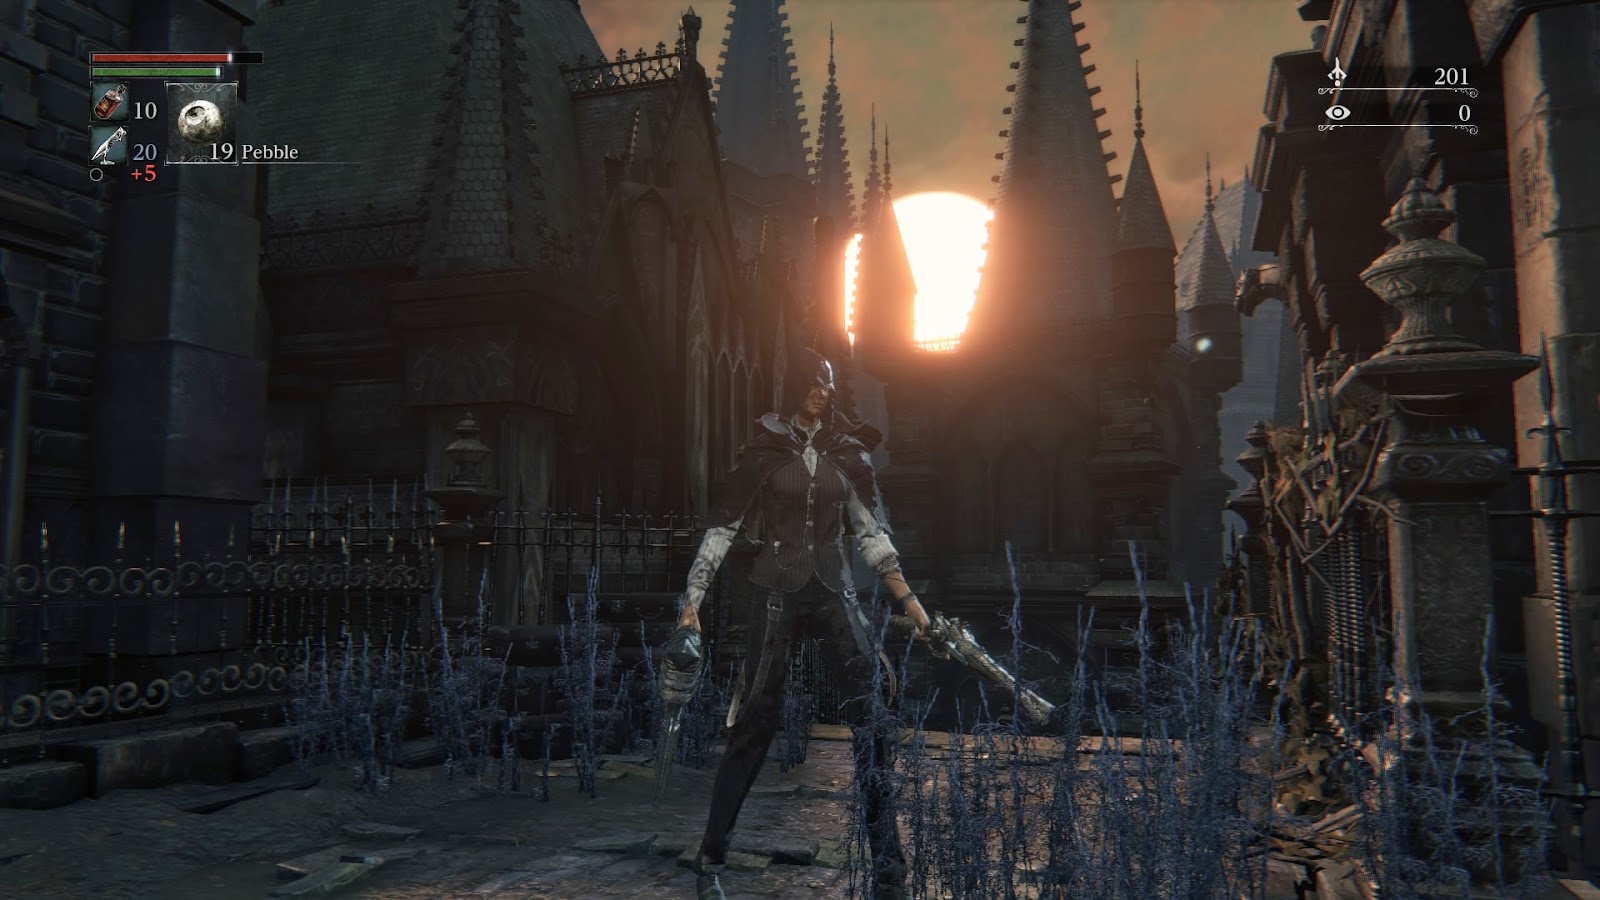 pov: you don't have PS4 to play bloodborne 💀 : r/darksouls3